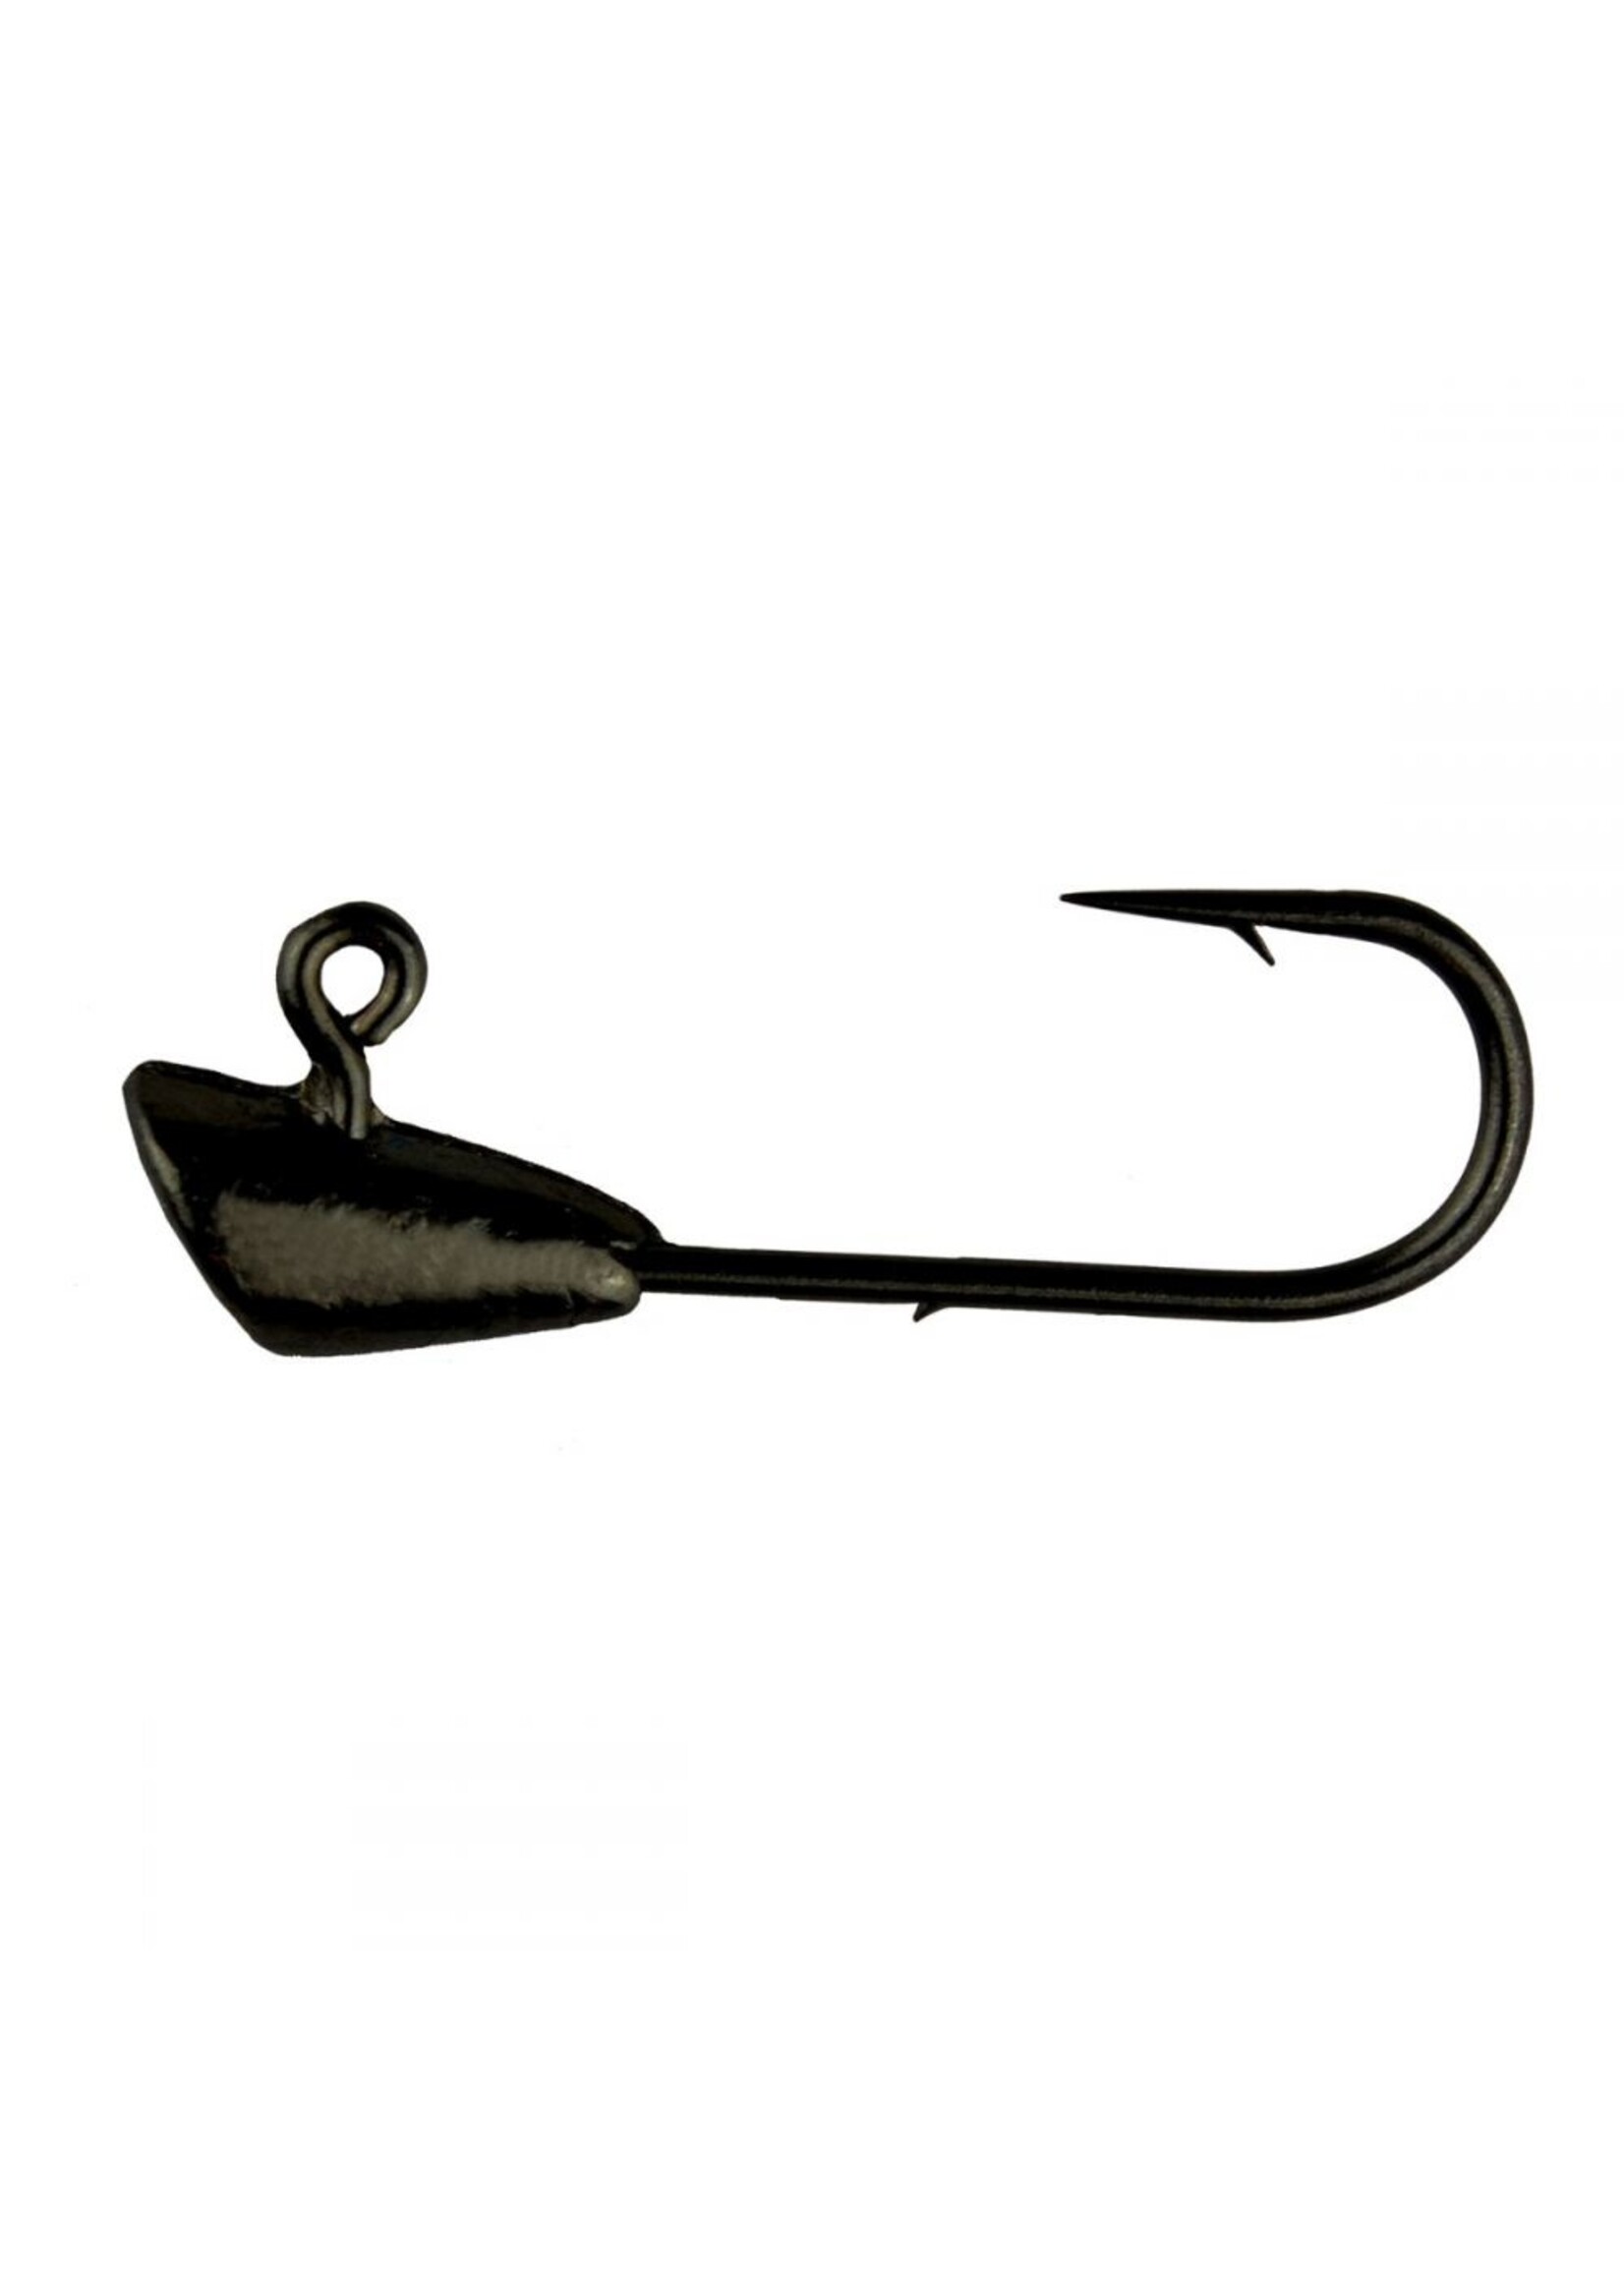 Leland Lures 87657 Trout Magnet Jig Heads